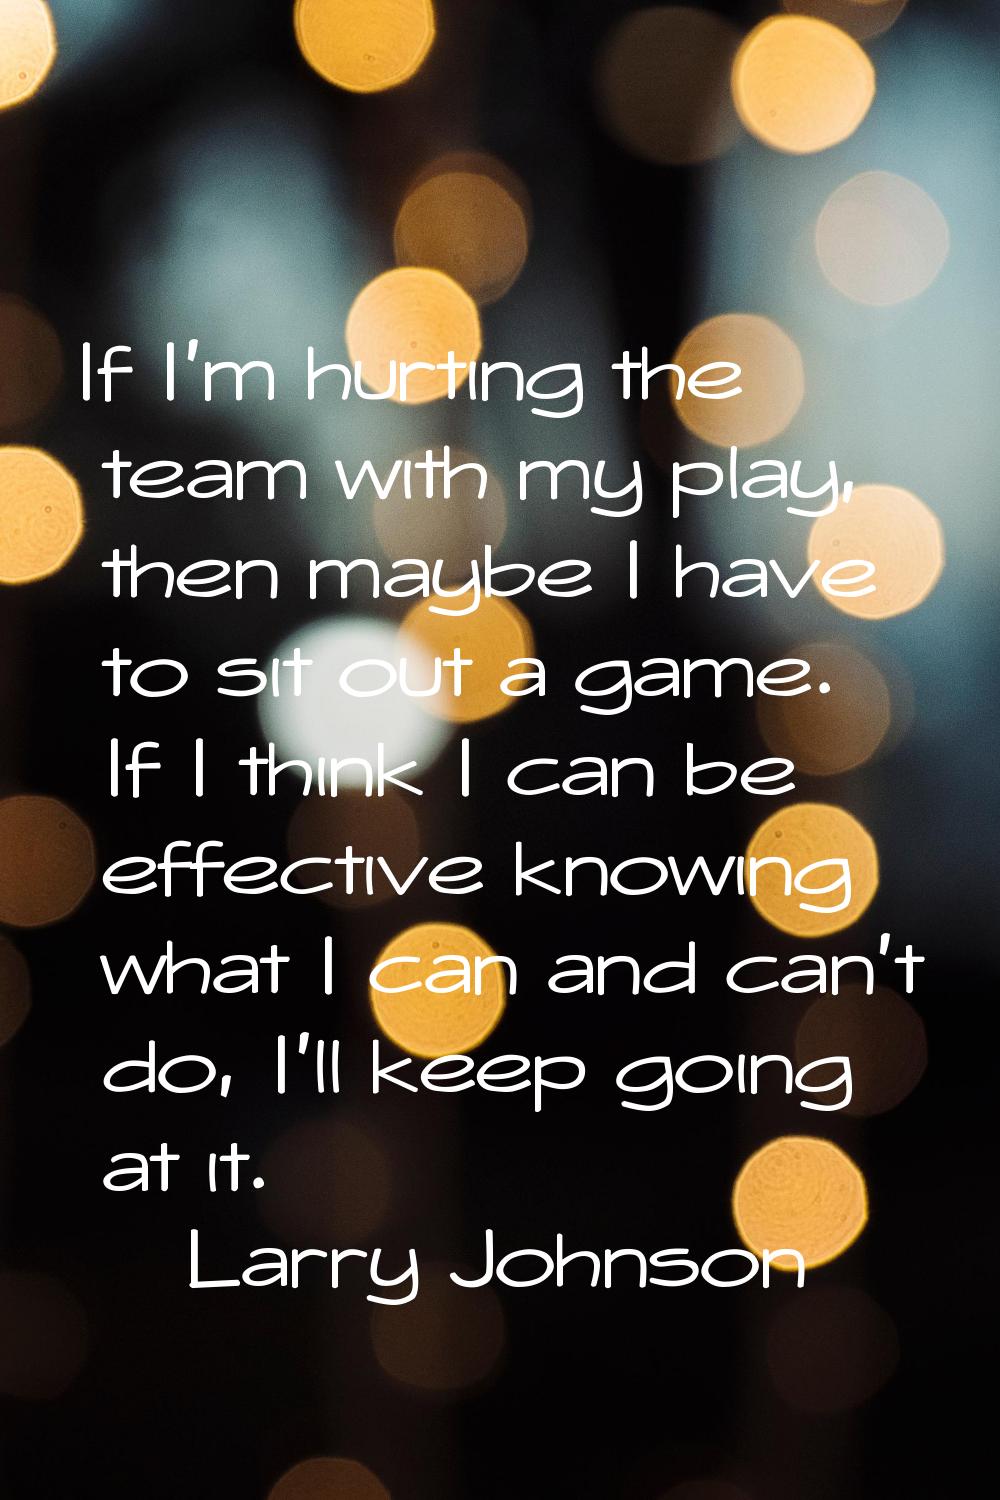 If I'm hurting the team with my play, then maybe I have to sit out a game. If I think I can be effe